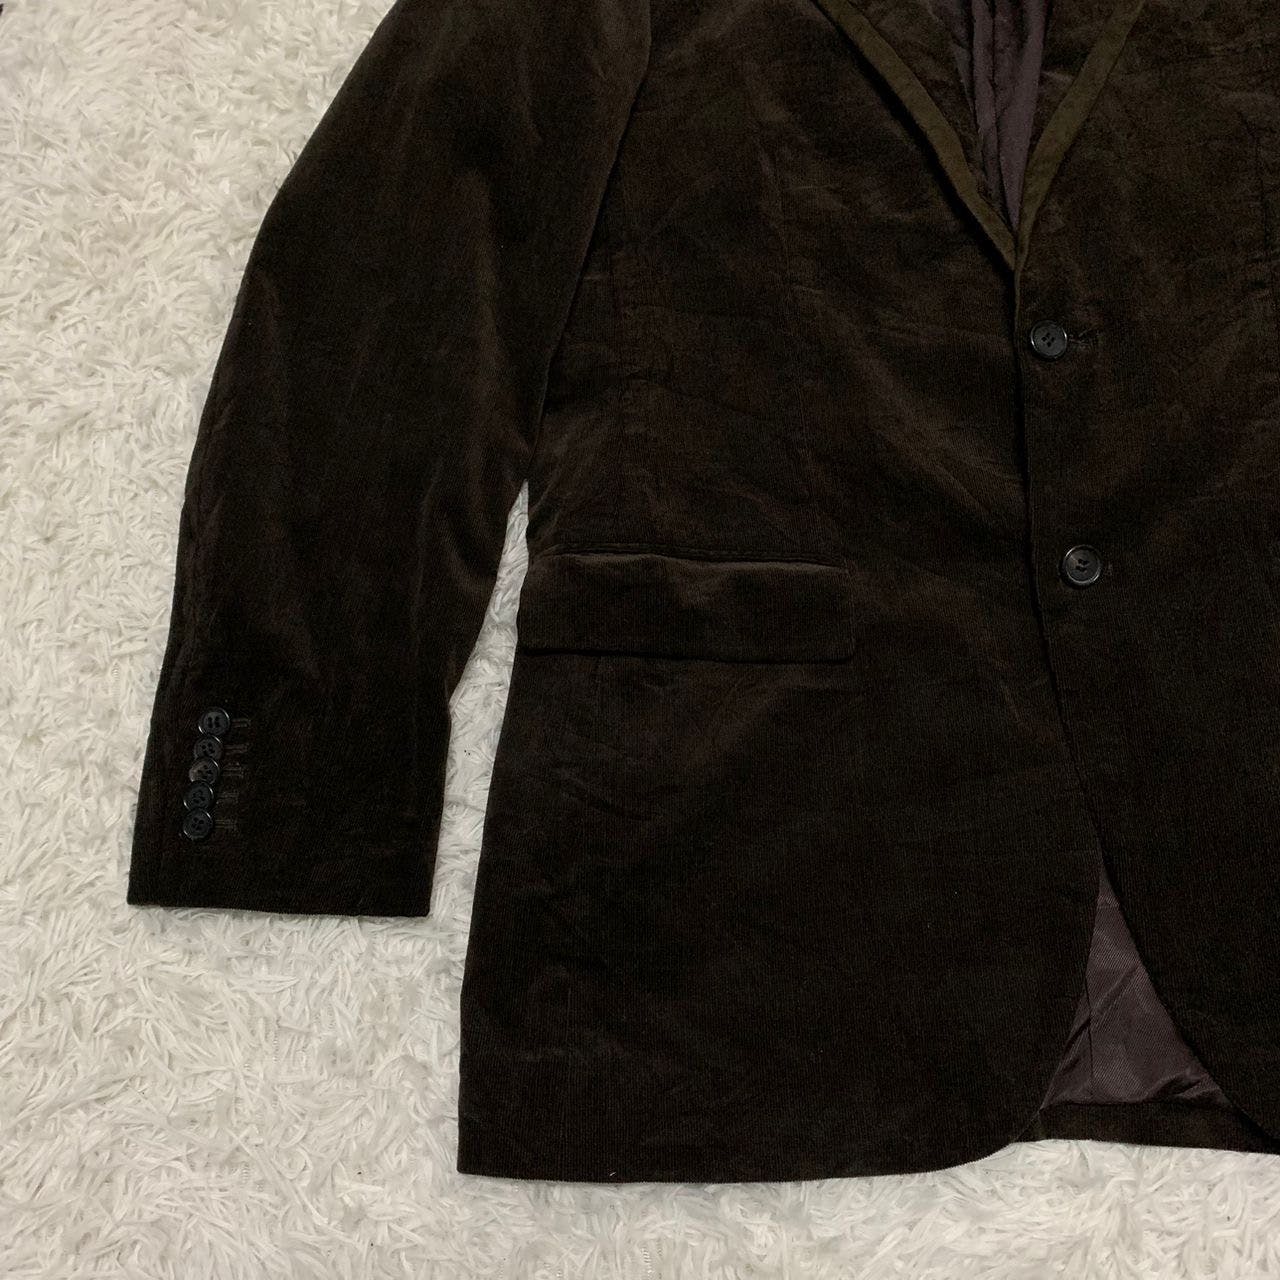 EZ by Zegna Jacket Coat Made in Japan - 5